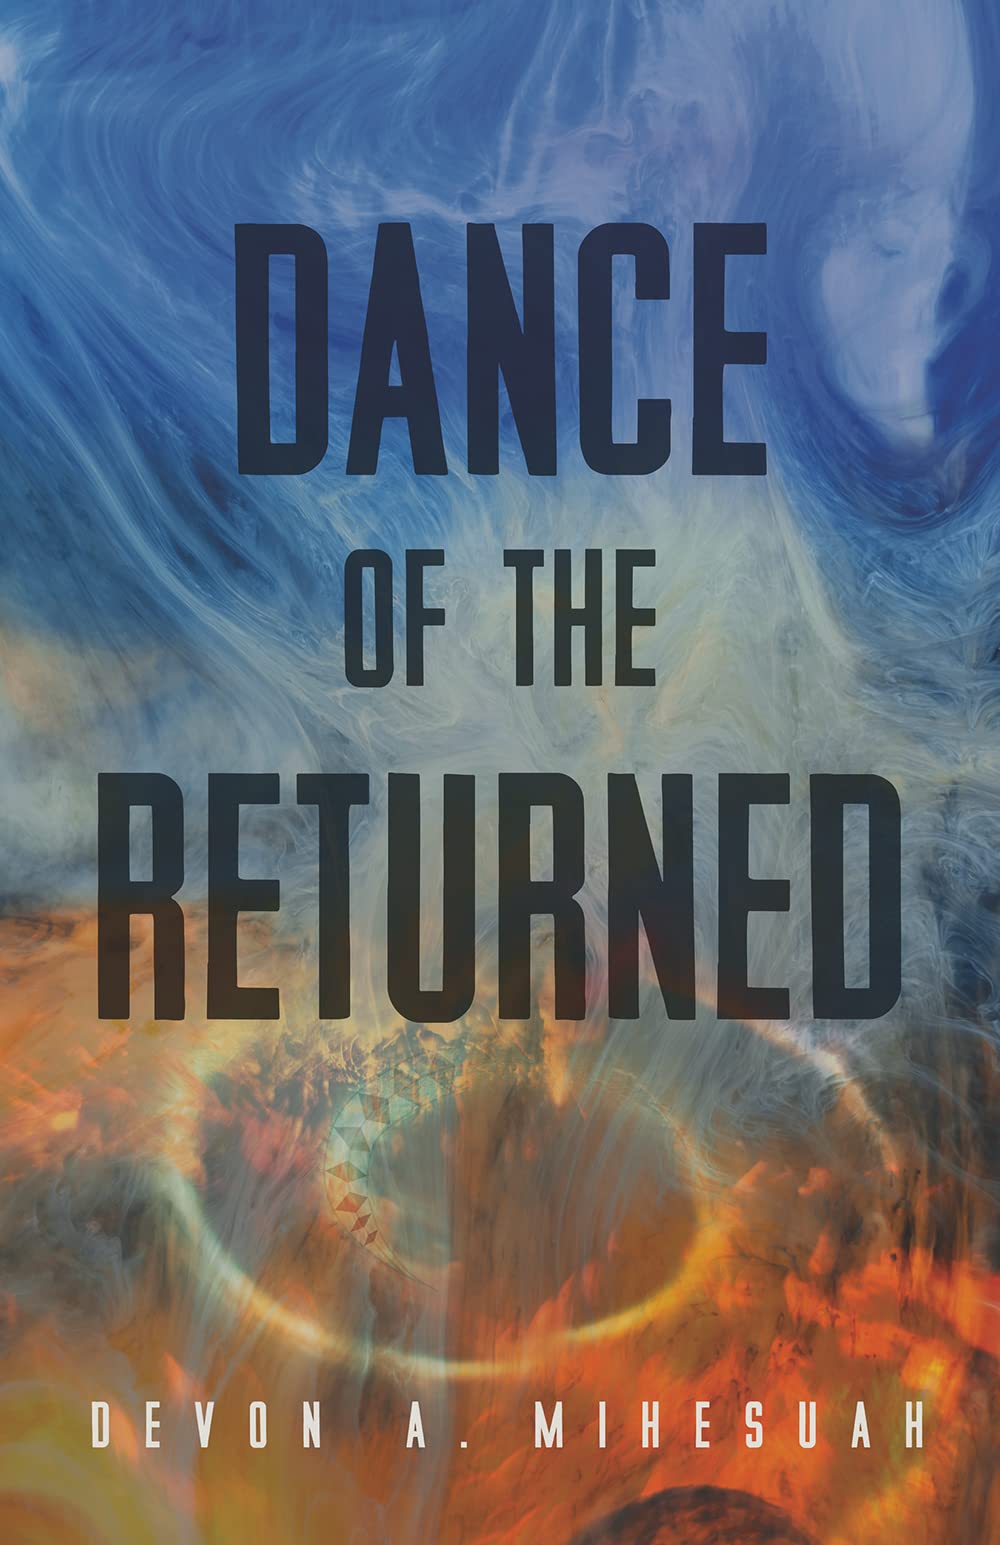 Dance of the Returned by Devon Mihesuah